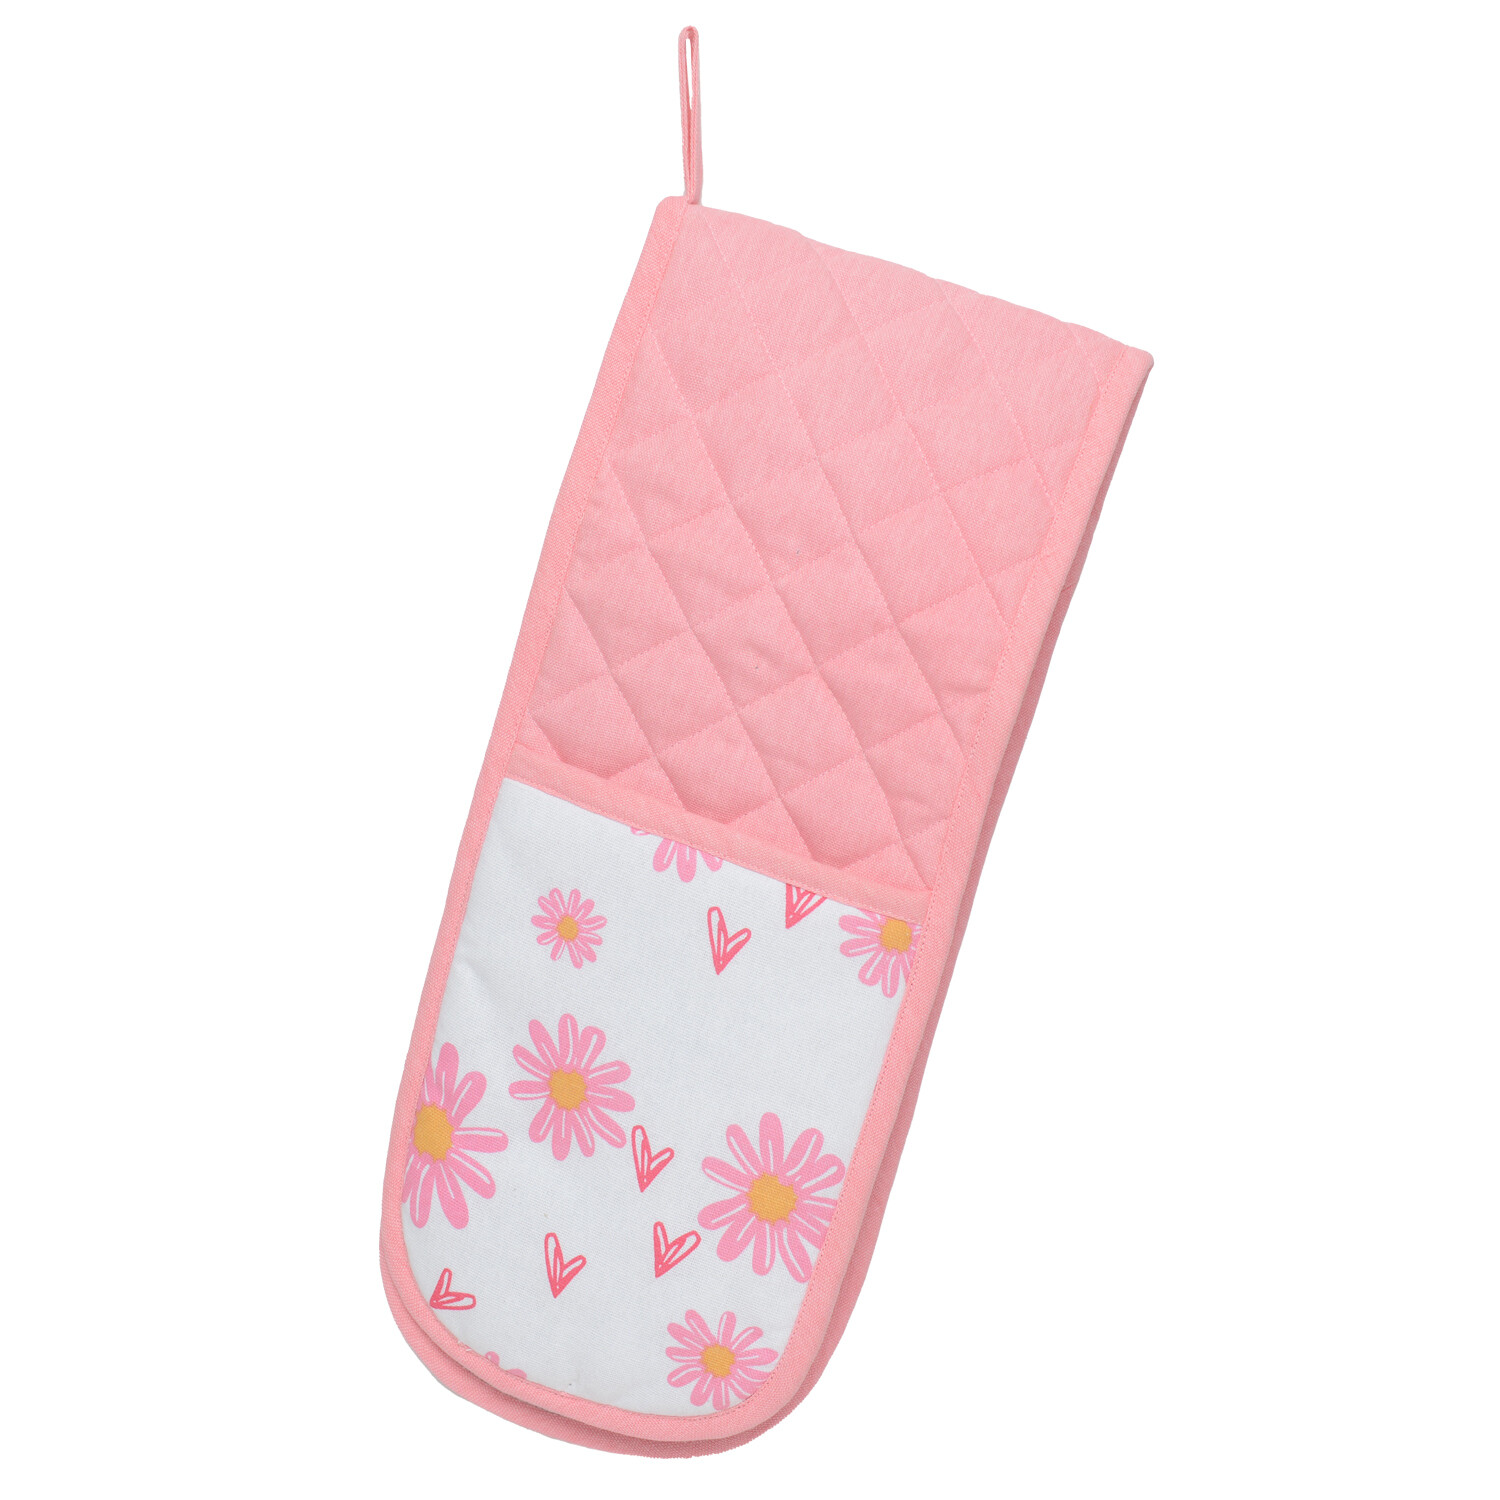 Daisy Daze Double Oven Gloves - Pink Image 1